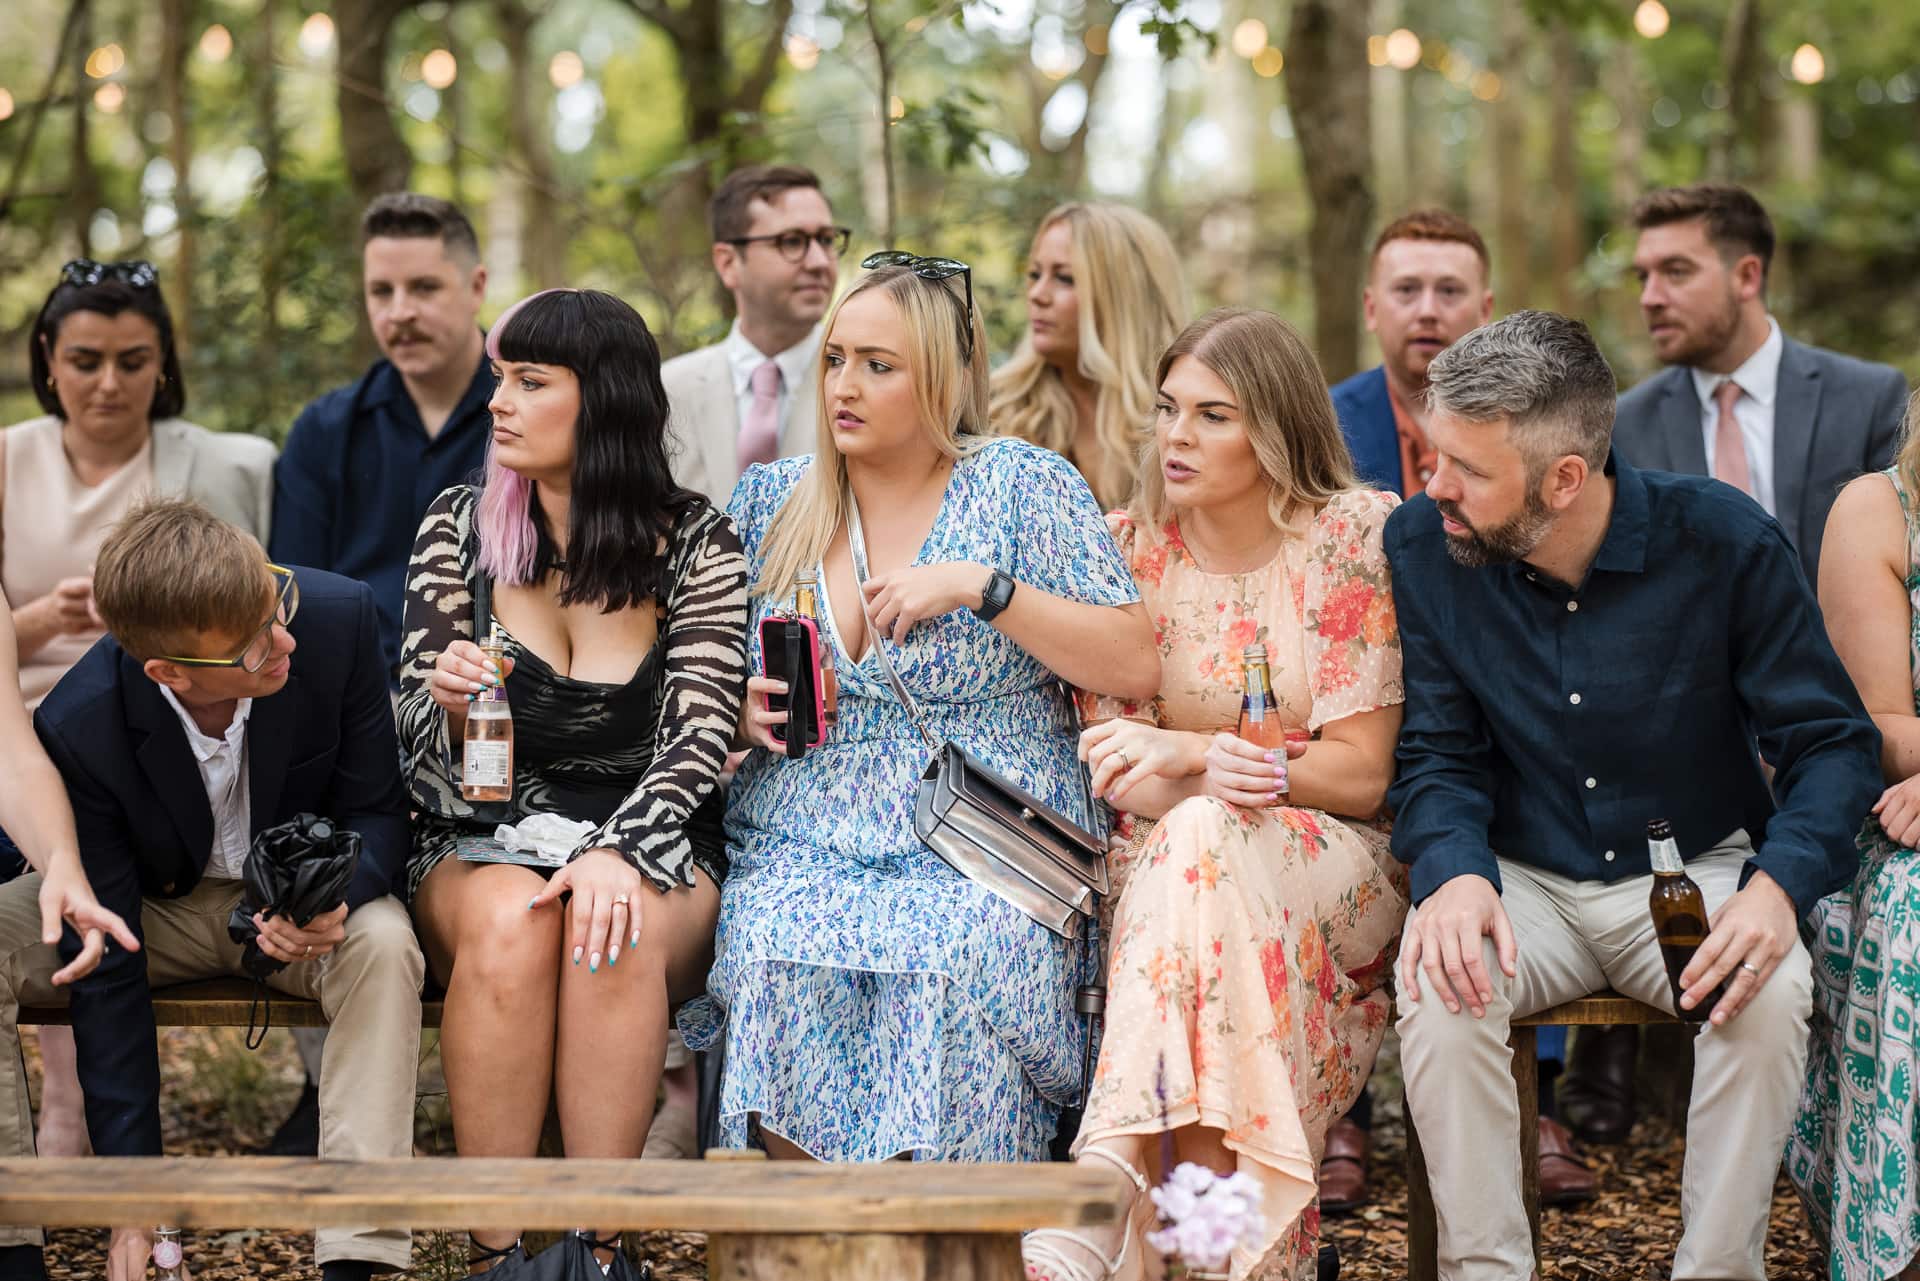 Guests chatting at the outdoor woodland wedding ceremony at Endeavour Woodland